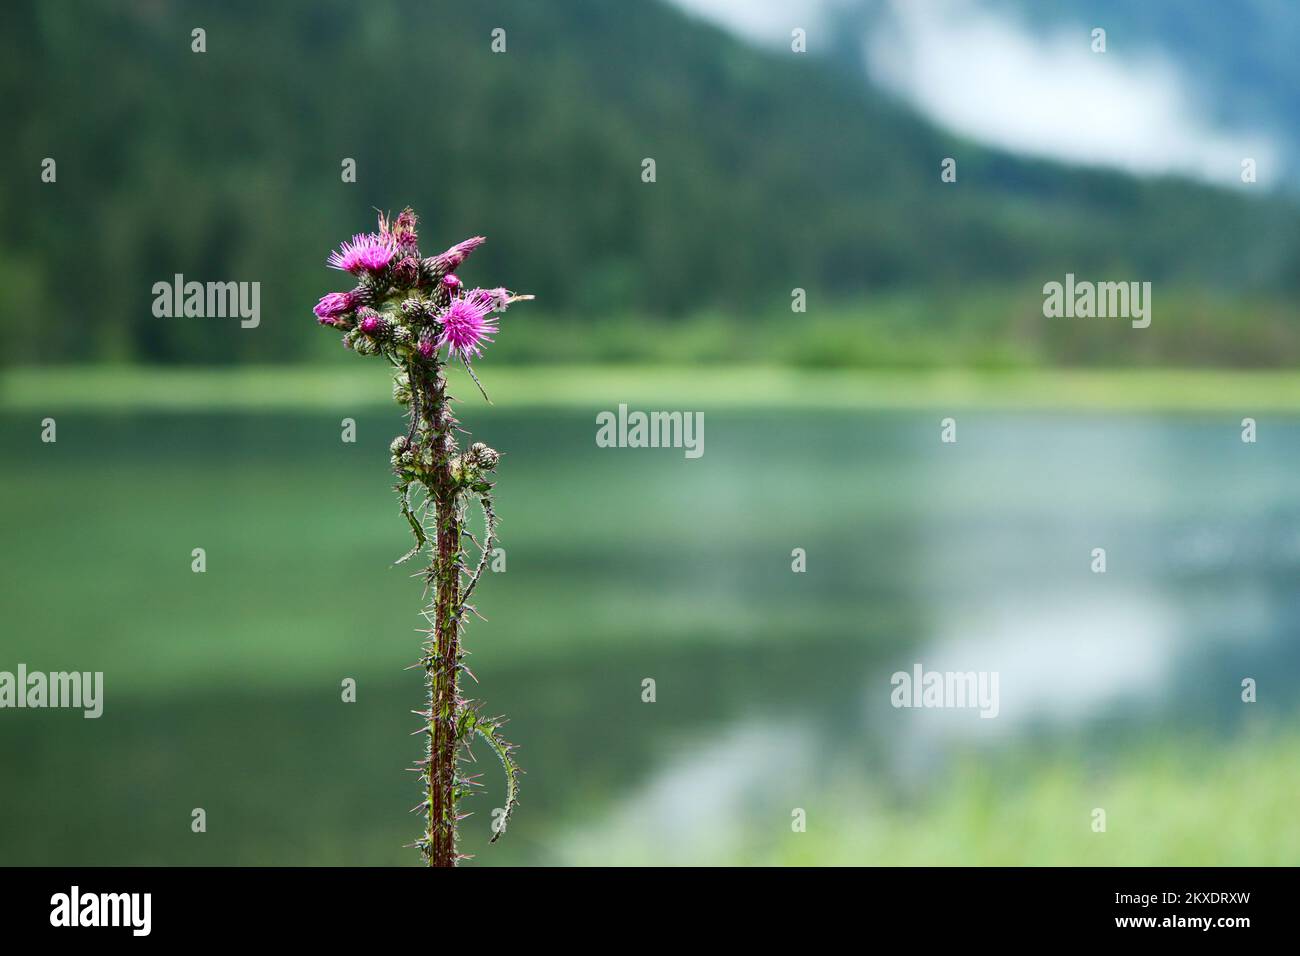 The detailed picture of one thistle with nice pink blooms with the lake and forest behind. Stock Photo